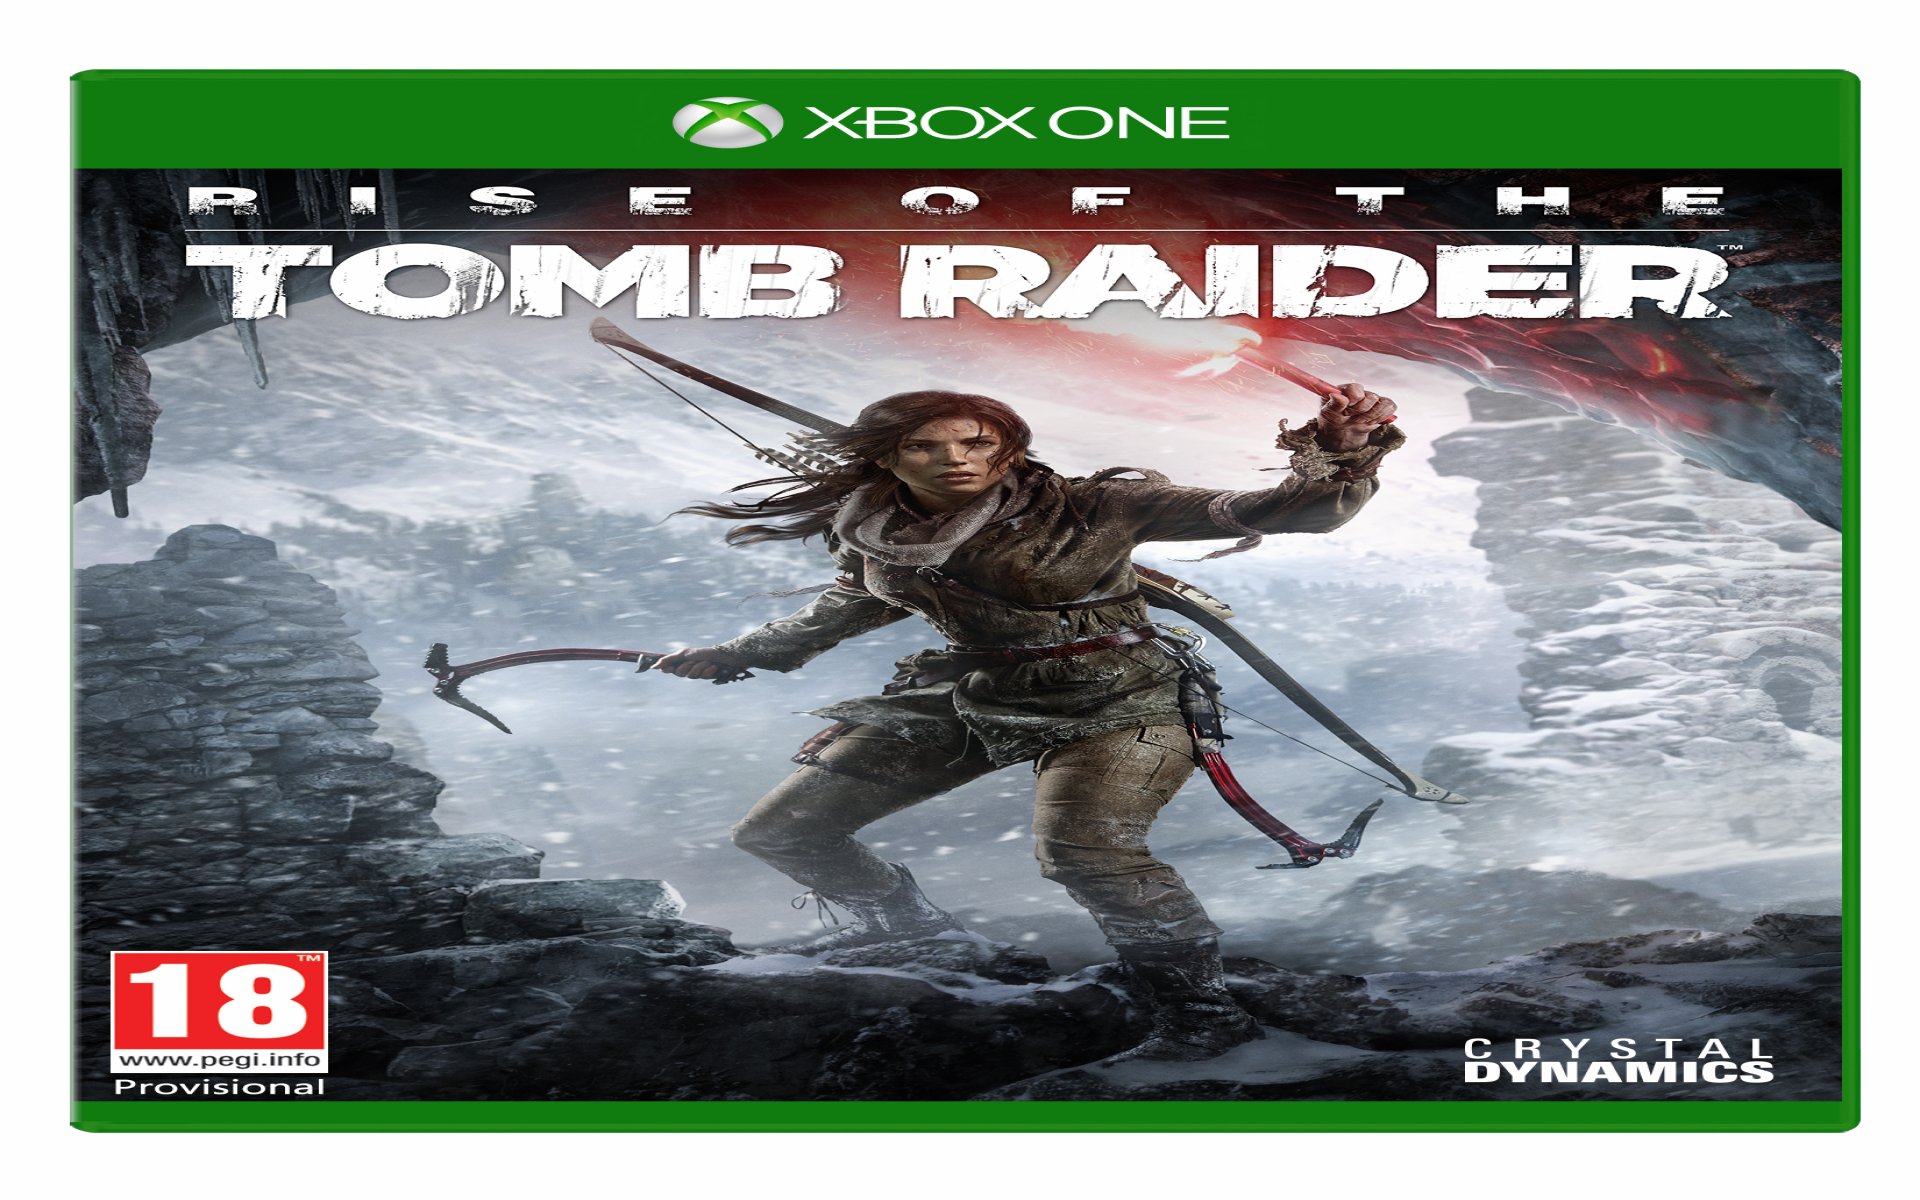 Rise of the Tomb Raider (XBOX 360) PD7-00017